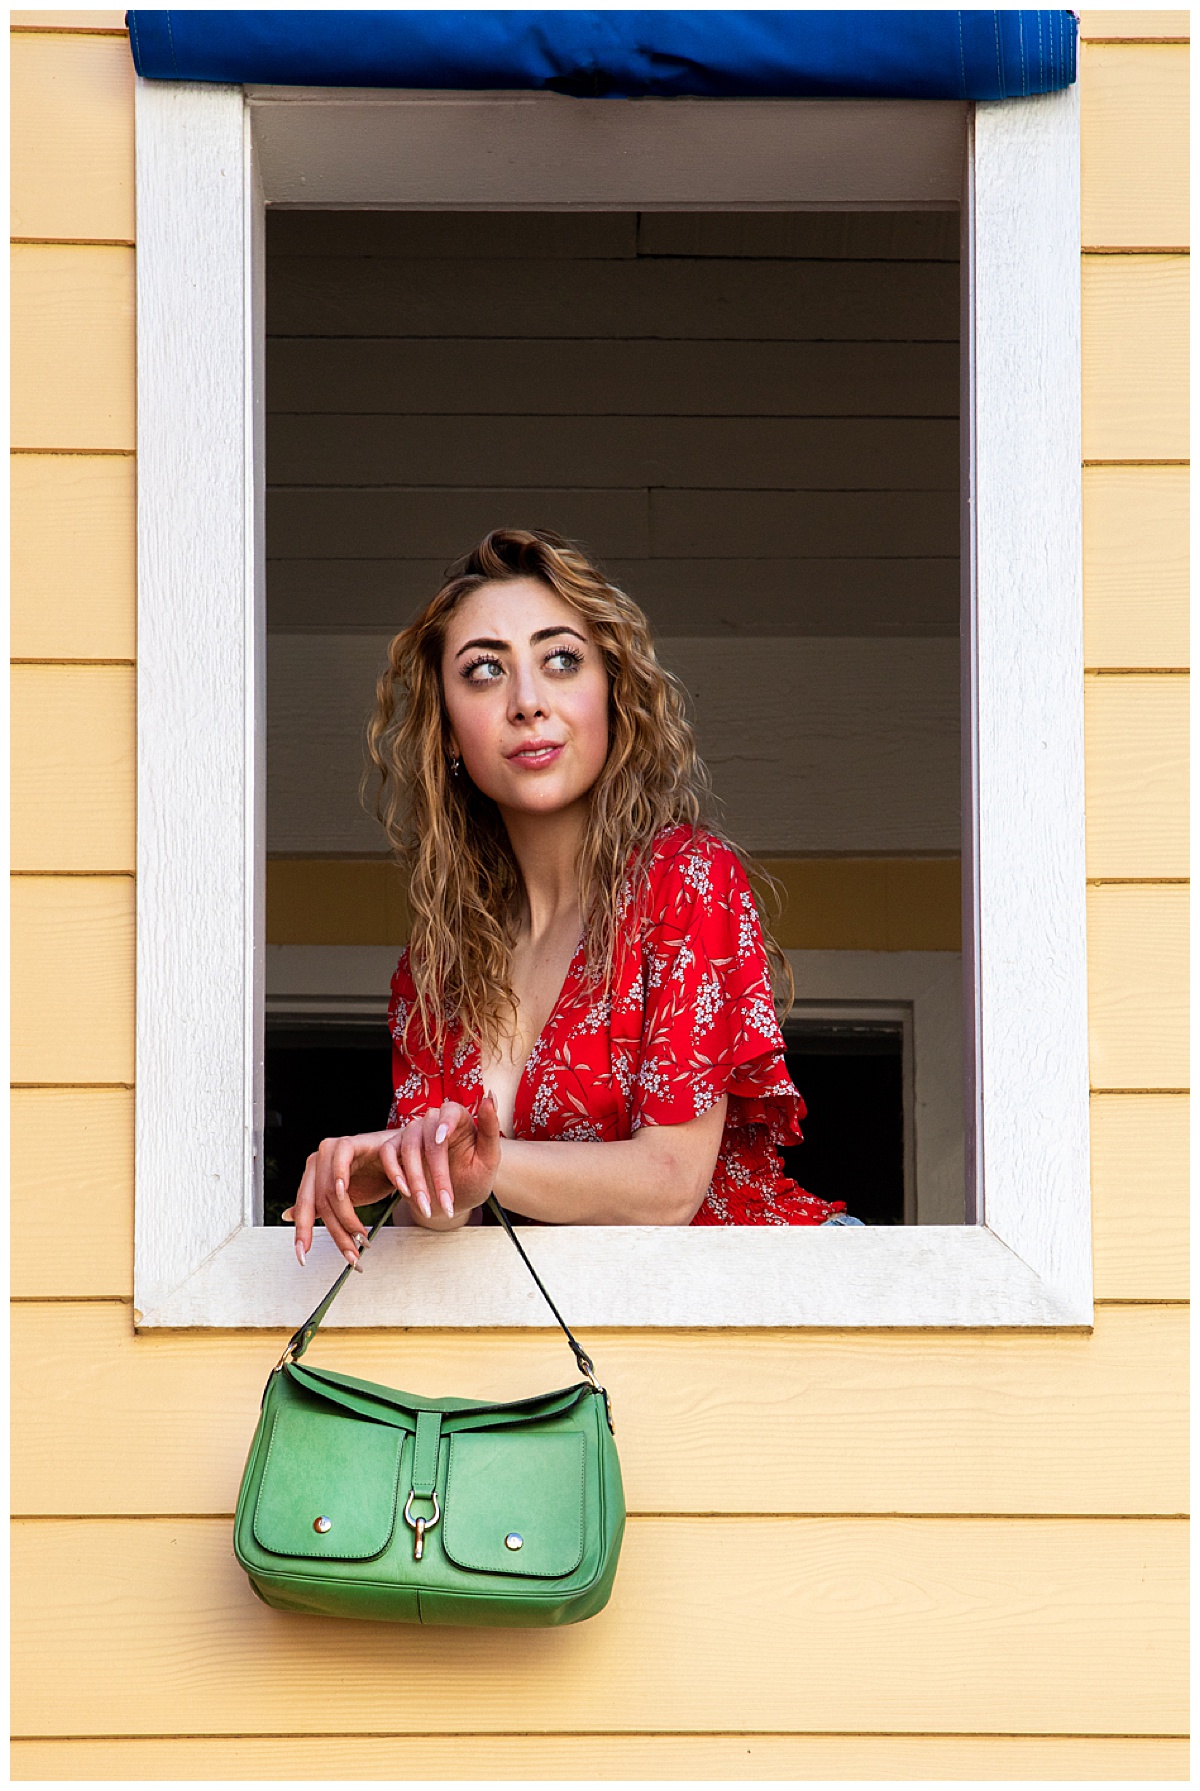 Woman with curly blonde hair wearing a red shirt leans out of a yellow window holding a green purse posing in a fashion photoshoot.